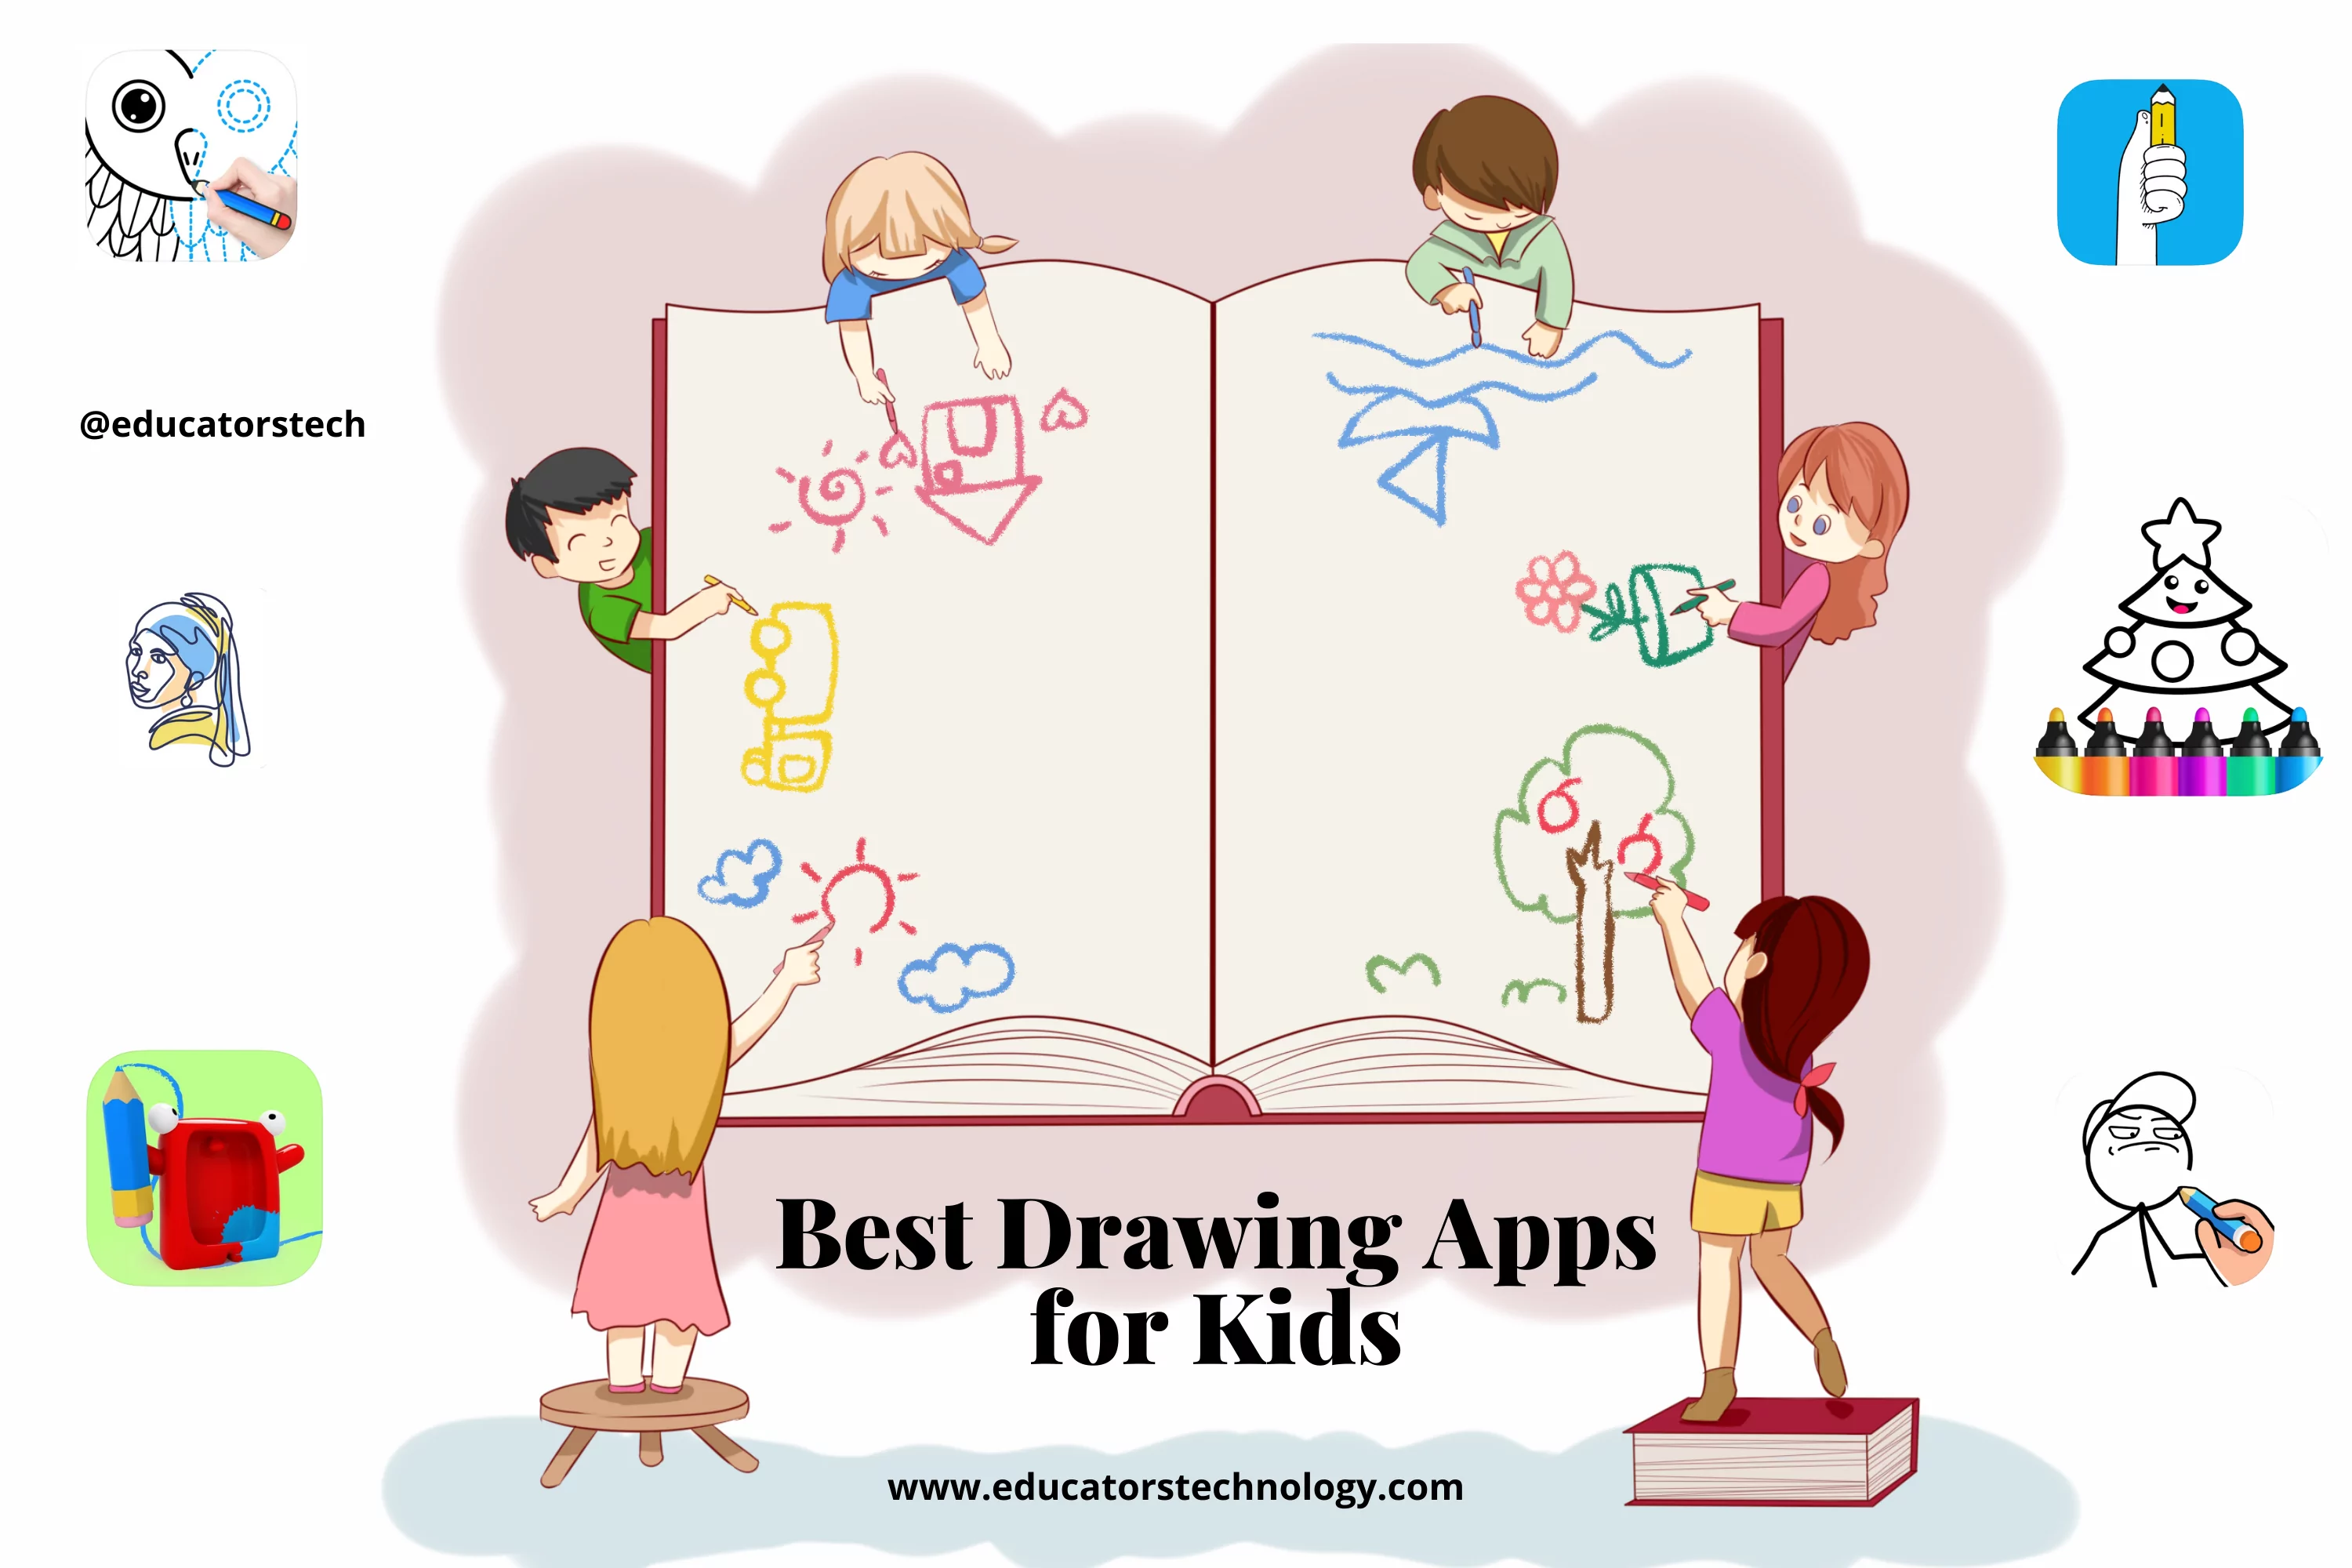 10 Best Drawing Apps for kids Educators Technology